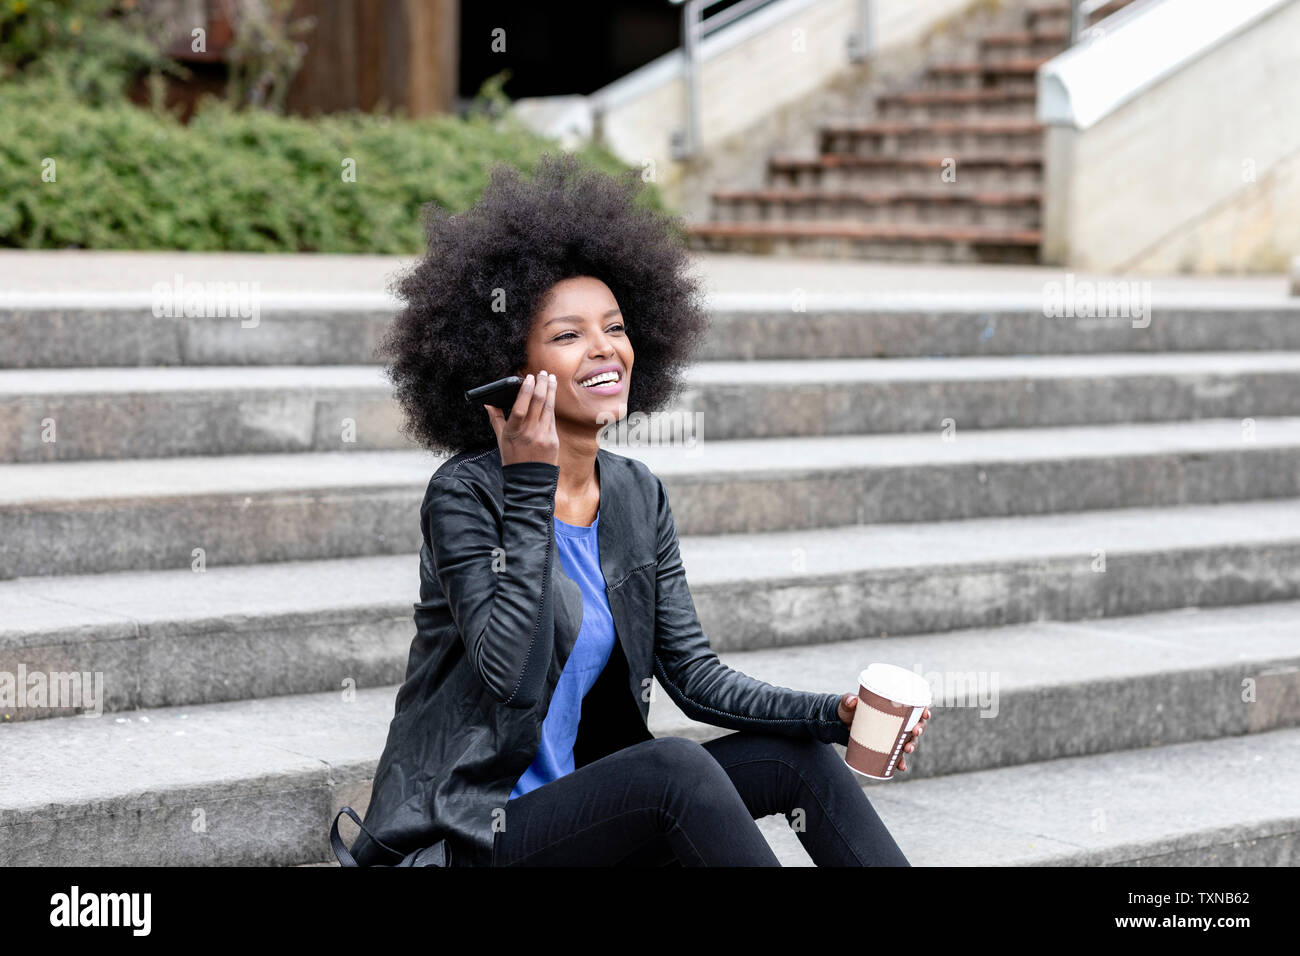 Happy young woman with afro hair sitting on city stairway, listening to smartphone Stock Photo